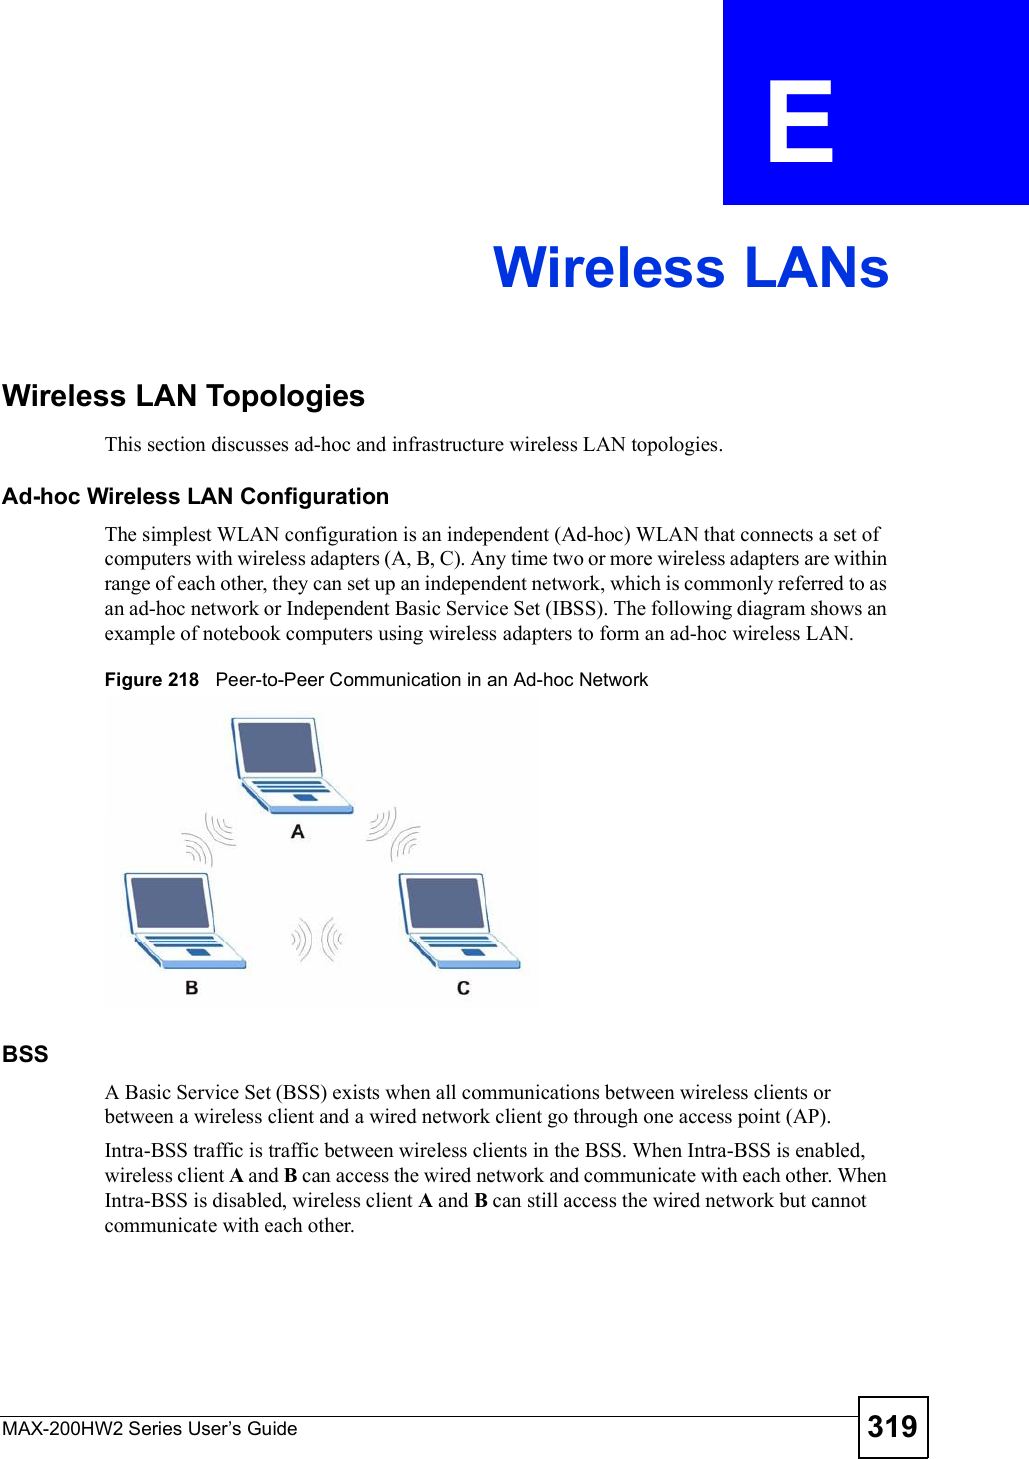 MAX-200HW2 Series User s Guide 319APPENDIX  E Wireless LANsWireless LAN TopologiesThis section discusses ad-hoc and infrastructure wireless LAN topologies.Ad-hoc Wireless LAN ConfigurationThe simplest WLAN configuration is an independent (Ad-hoc) WLAN that connects a set of computers with wireless adapters (A, B, C). Any time two or more wireless adapters are within range of each other, they can set up an independent network, which is commonly referred to as an ad-hoc network or Independent Basic Service Set (IBSS). The following diagram shows an example of notebook computers using wireless adapters to form an ad-hoc wireless LAN. Figure 218   Peer-to-Peer Communication in an Ad-hoc NetworkBSSA Basic Service Set (BSS) exists when all communications between wireless clients or between a wireless client and a wired network client go through one access point (AP). Intra-BSS traffic is traffic between wireless clients in the BSS. When Intra-BSS is enabled, wireless client A and B can access the wired network and communicate with each other. When Intra-BSS is disabled, wireless client A and B can still access the wired network but cannot communicate with each other.